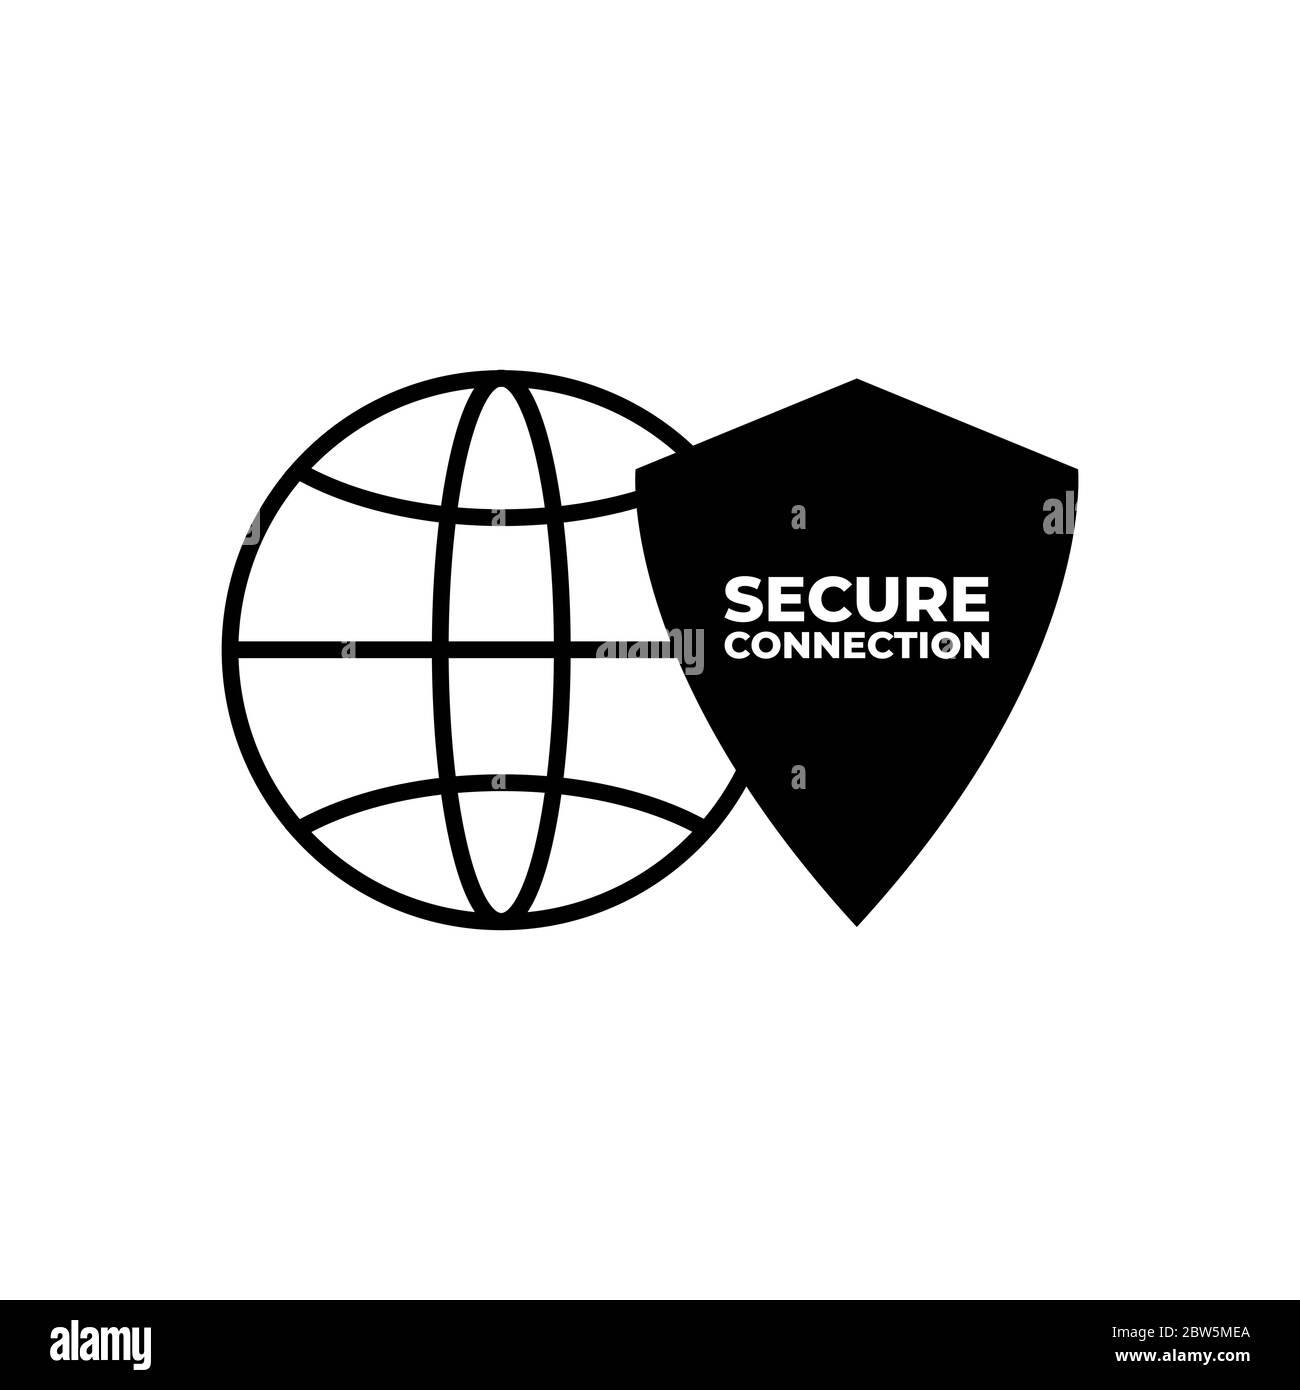 SSL secure https certificate connection icon vector illustration isolated, black and white secured shield and globe web symbols, protected payment ide Stock Vector